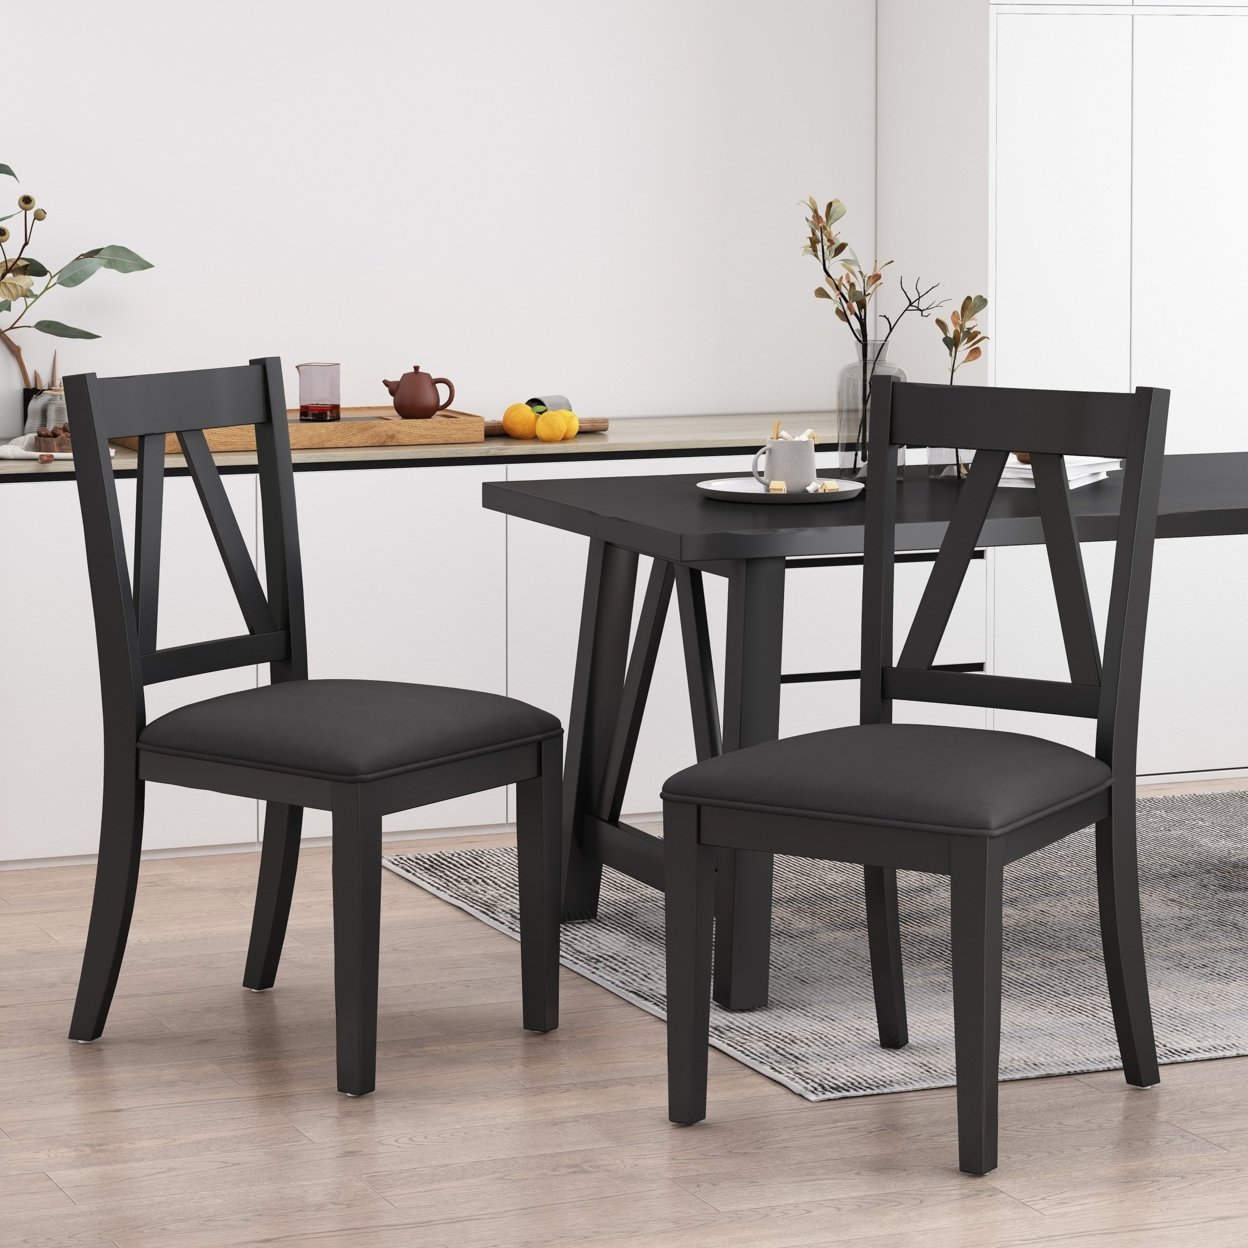 Grover Farmhouse Upholstered Wood Dining Chairs, Set Of 2 - Black